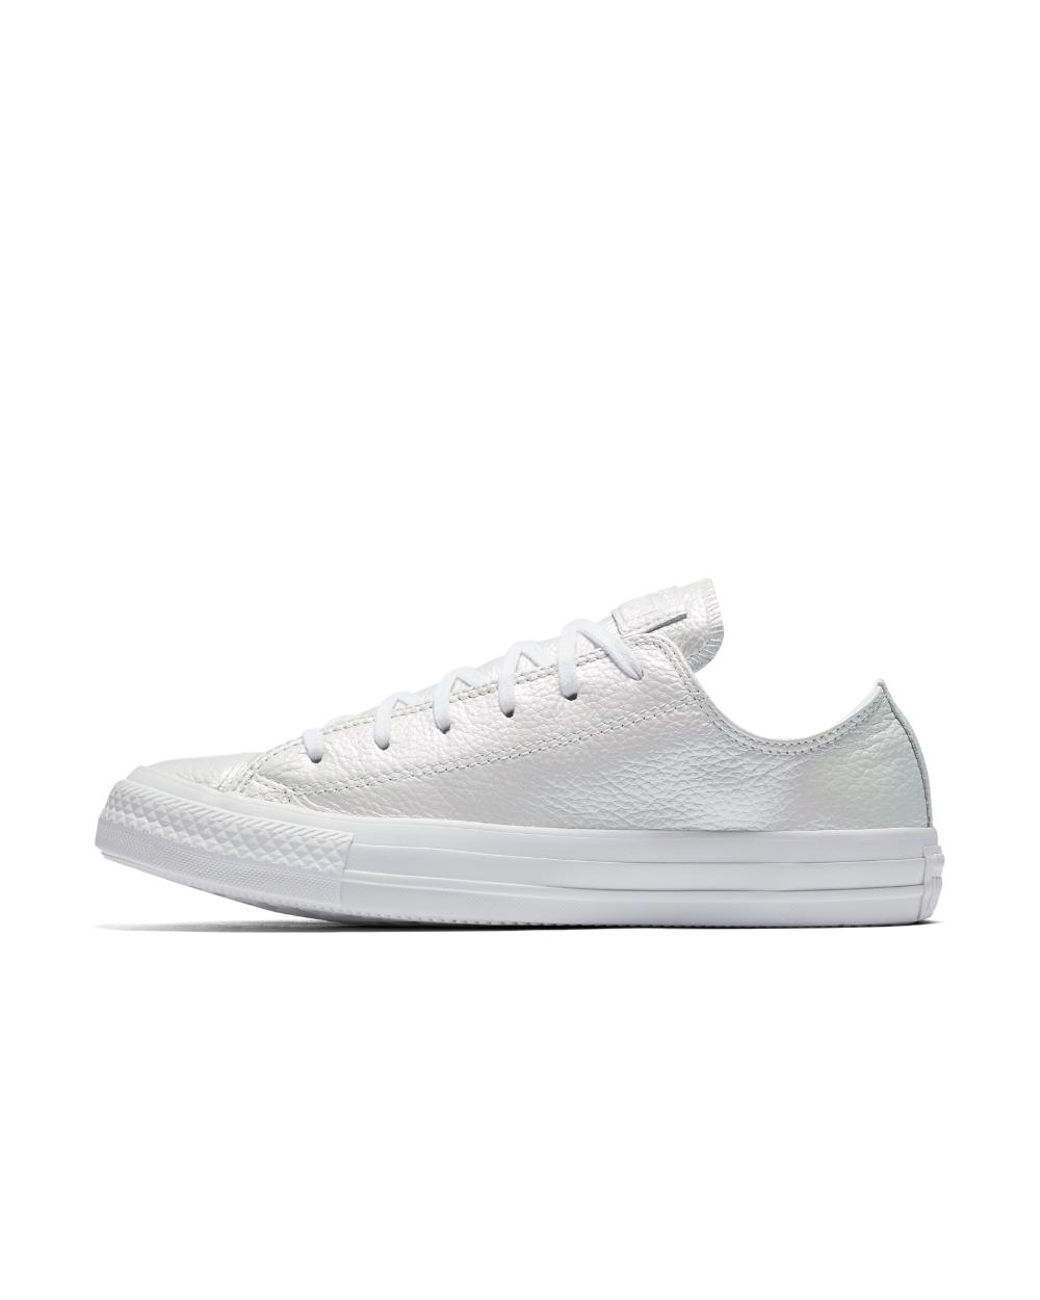 Converse Chuck Taylor All Star Iridescent Leather Low Top Women's Shoe in  White | Lyst